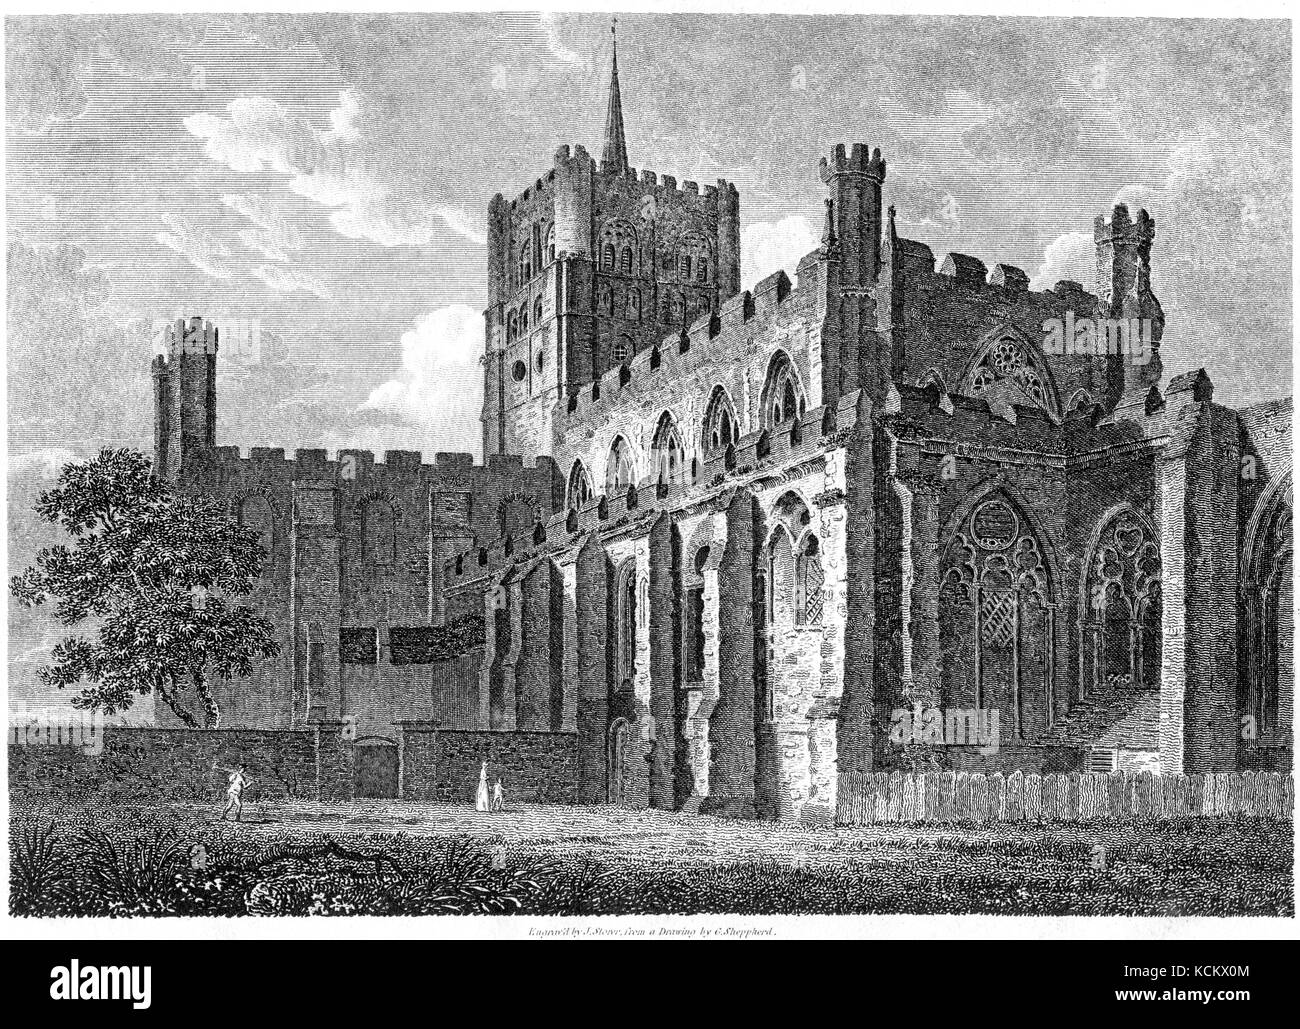 An engraving of the S E View of the Abbey Church, St Albans, Herts scanned at high resolution from a book printed in 1819. Believed copyright free. Stock Photo